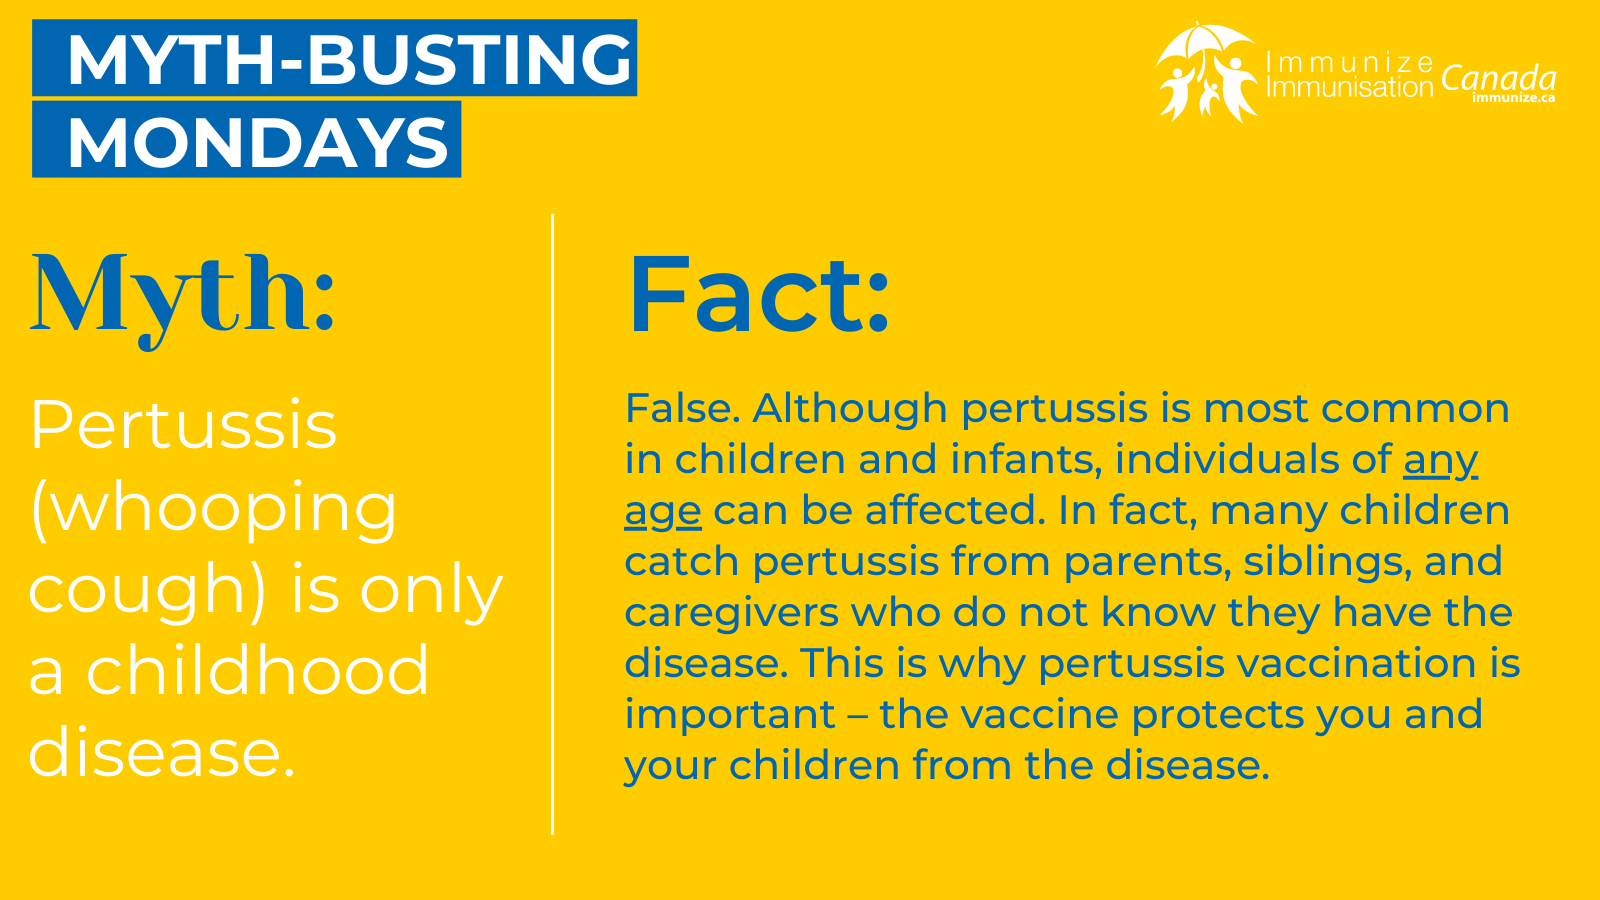 ​Myth-busting Monday - image 2 for Twitter